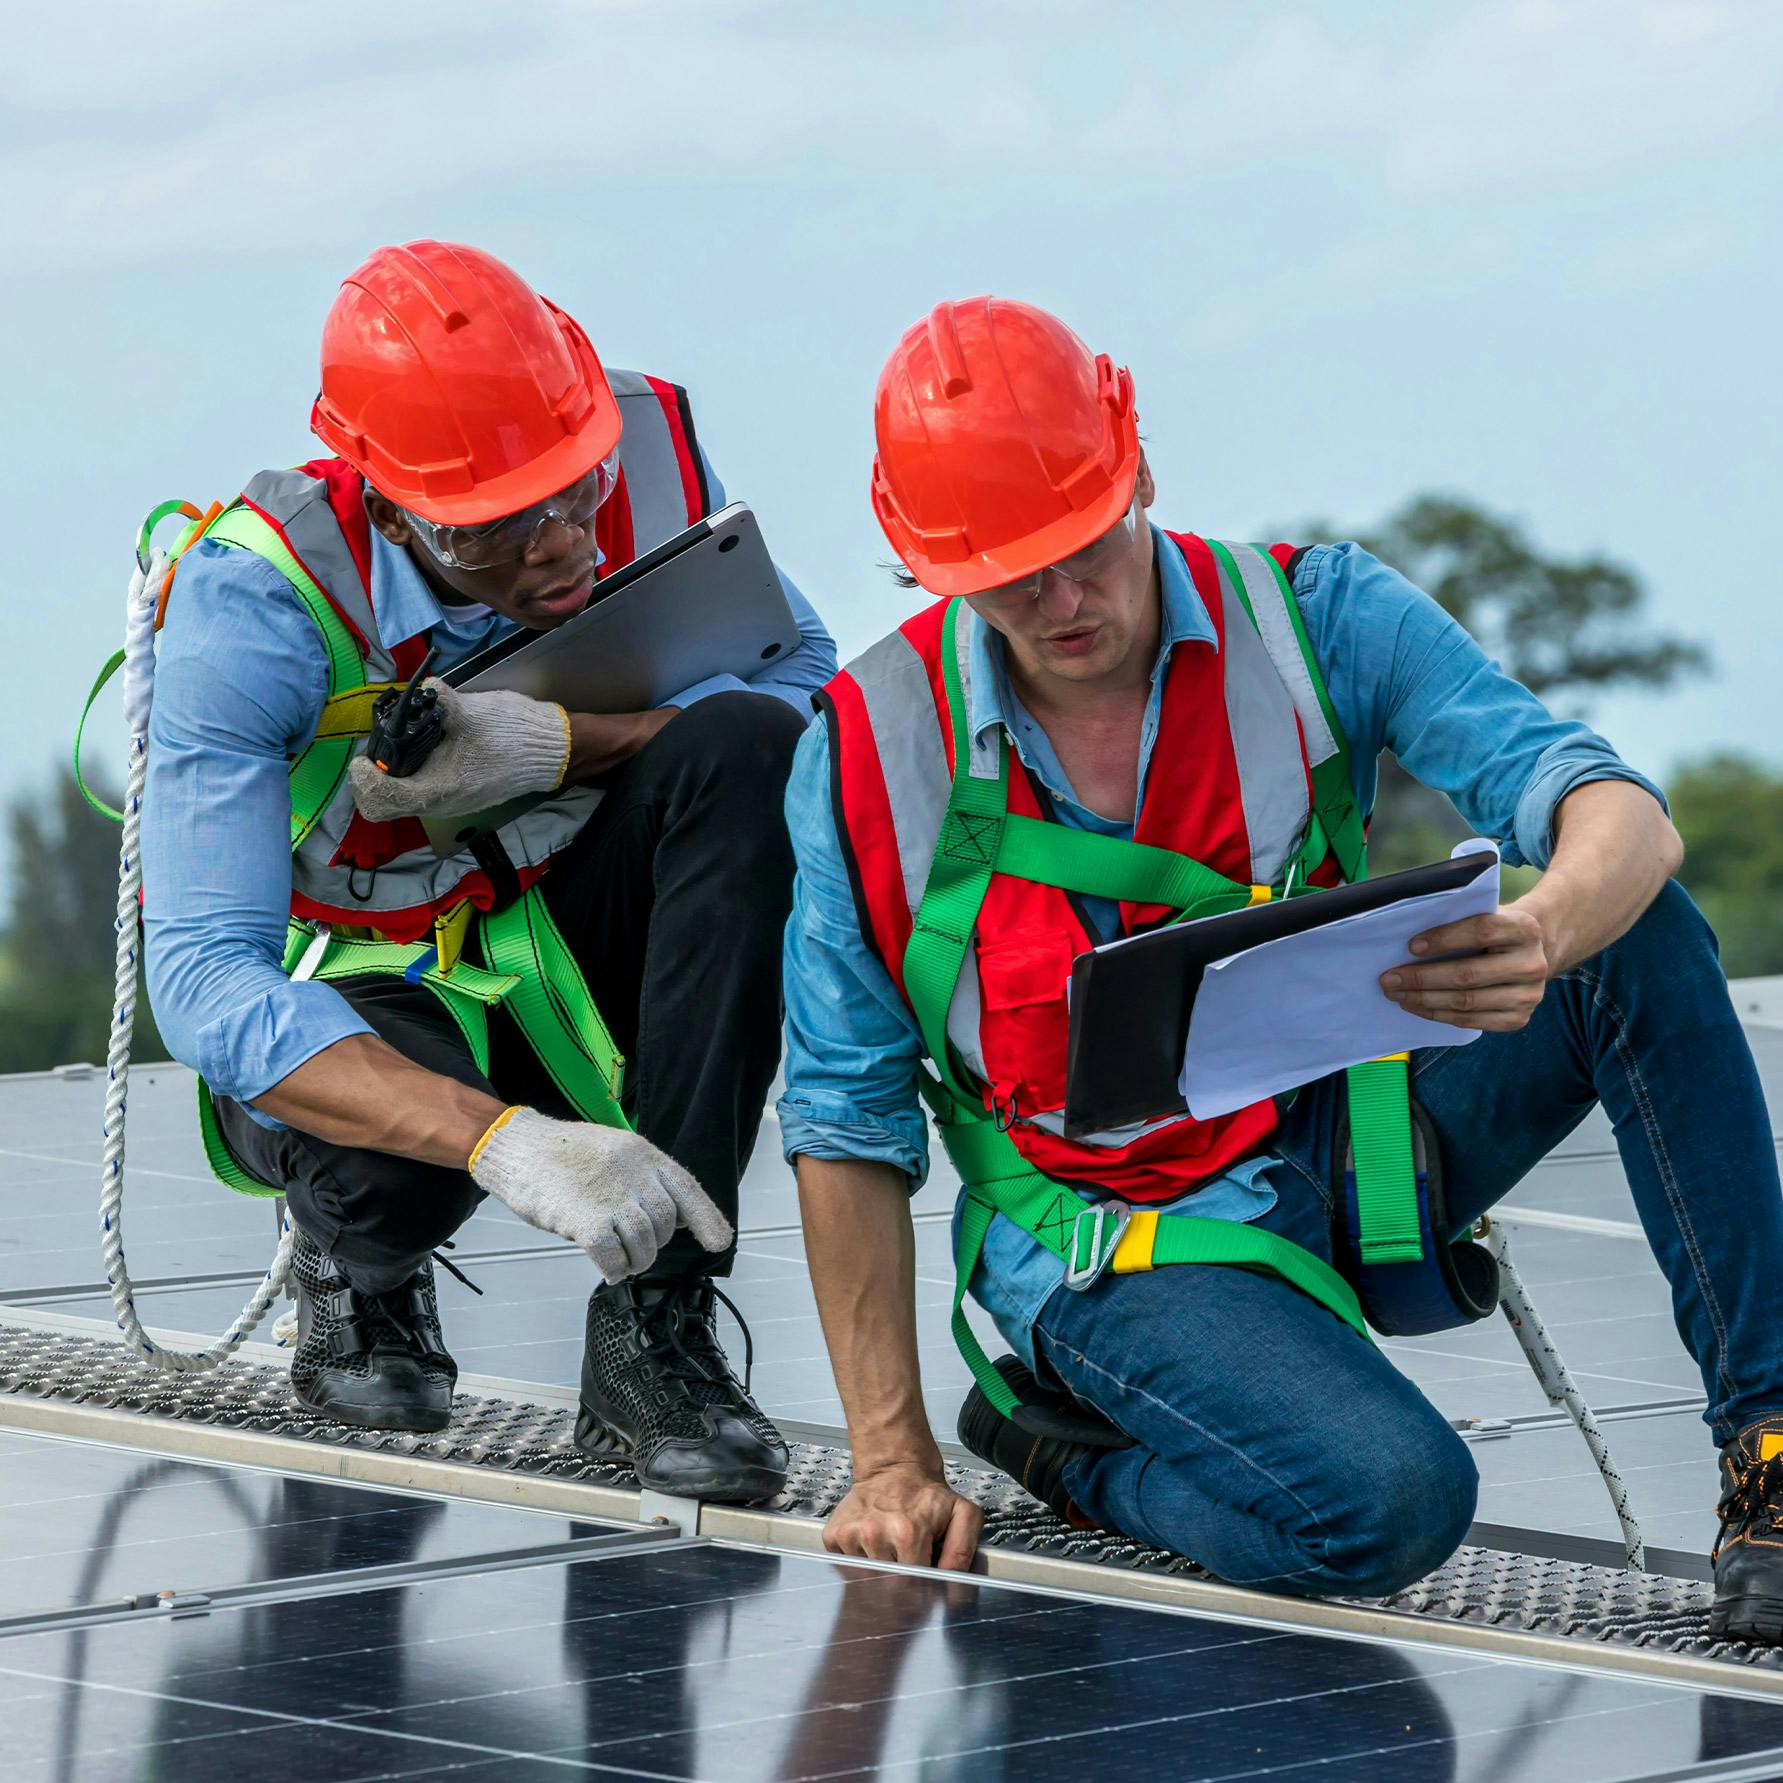 People inspecting and installer solar panels